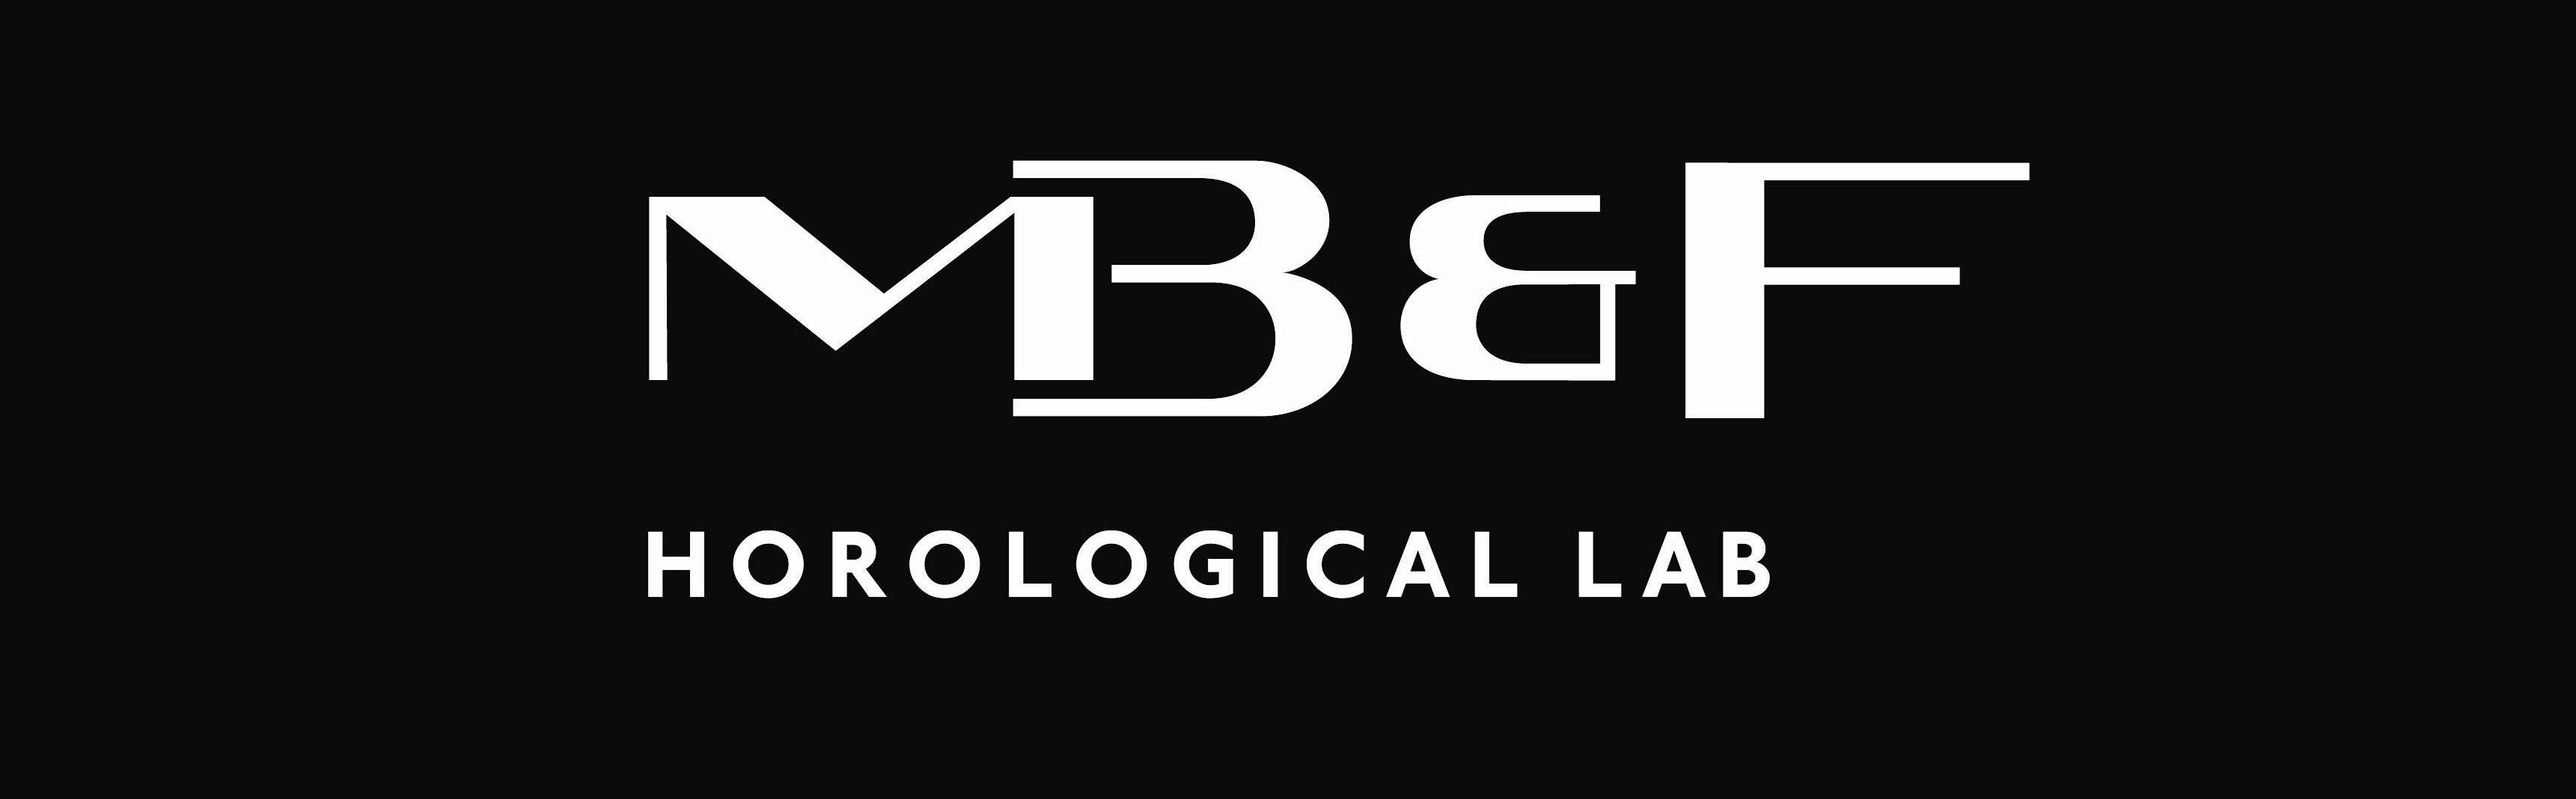 MB&F logo - the brand created by Max Büsser